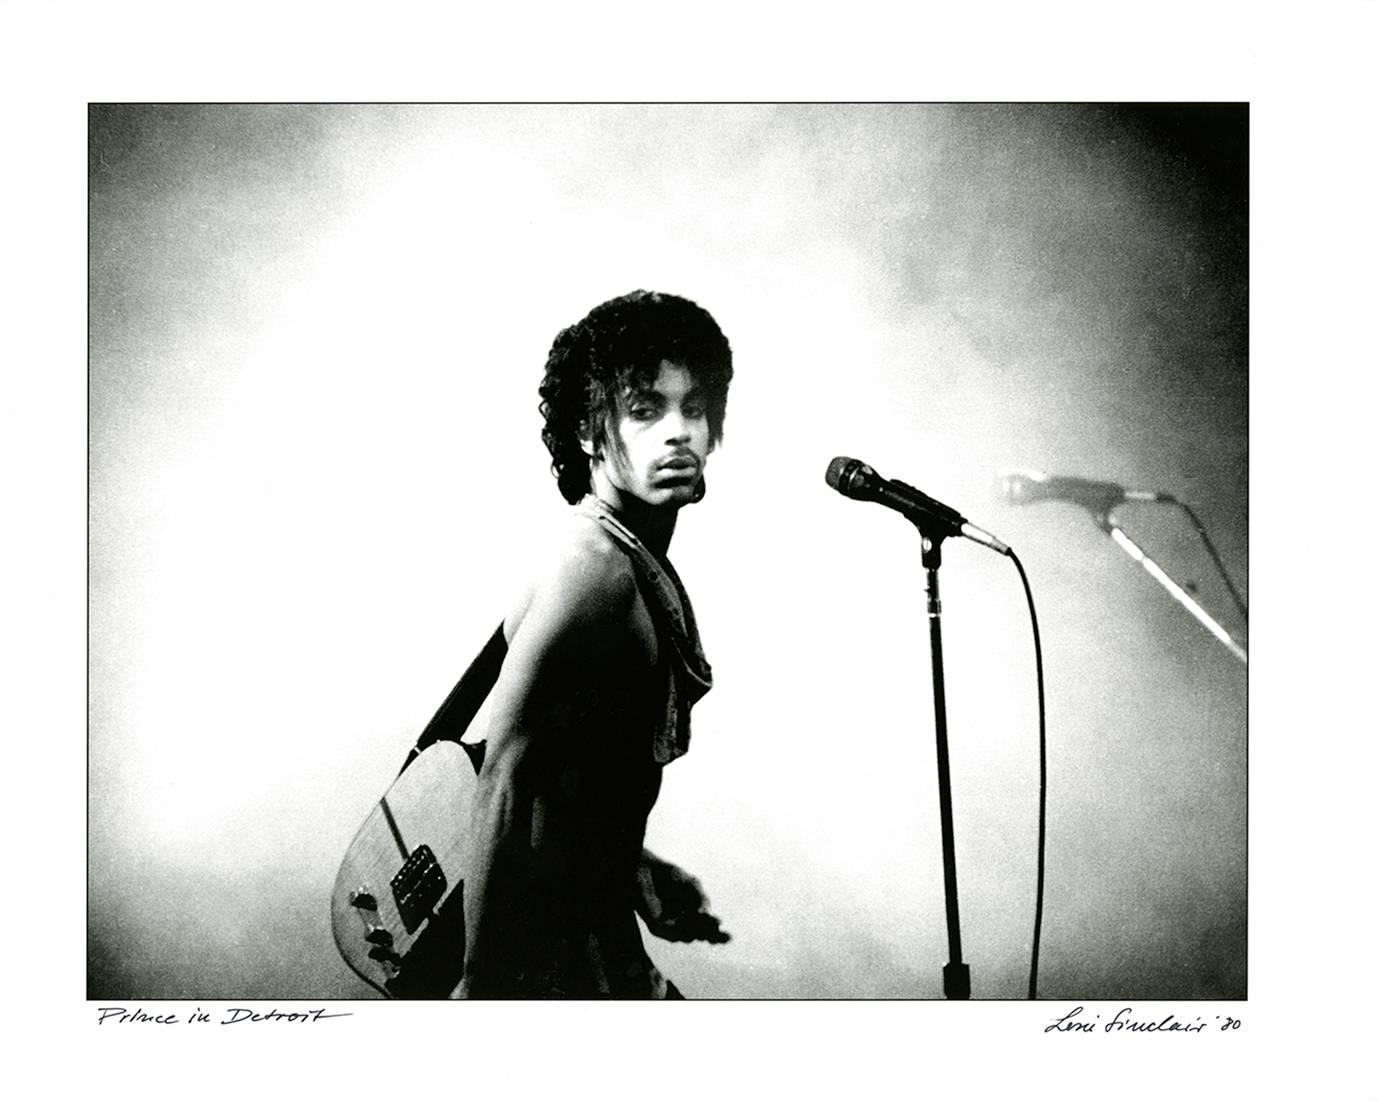 Prince photograph Detroit 1980:
A standout, hand signed photograph of the late all-time great Prince, shot by legendary Detroit photographer Leni Sinclair, 2016's Kresge Foundation's Eminent Artist of 2016 (See The Guardian UK Photo Section, Jan.